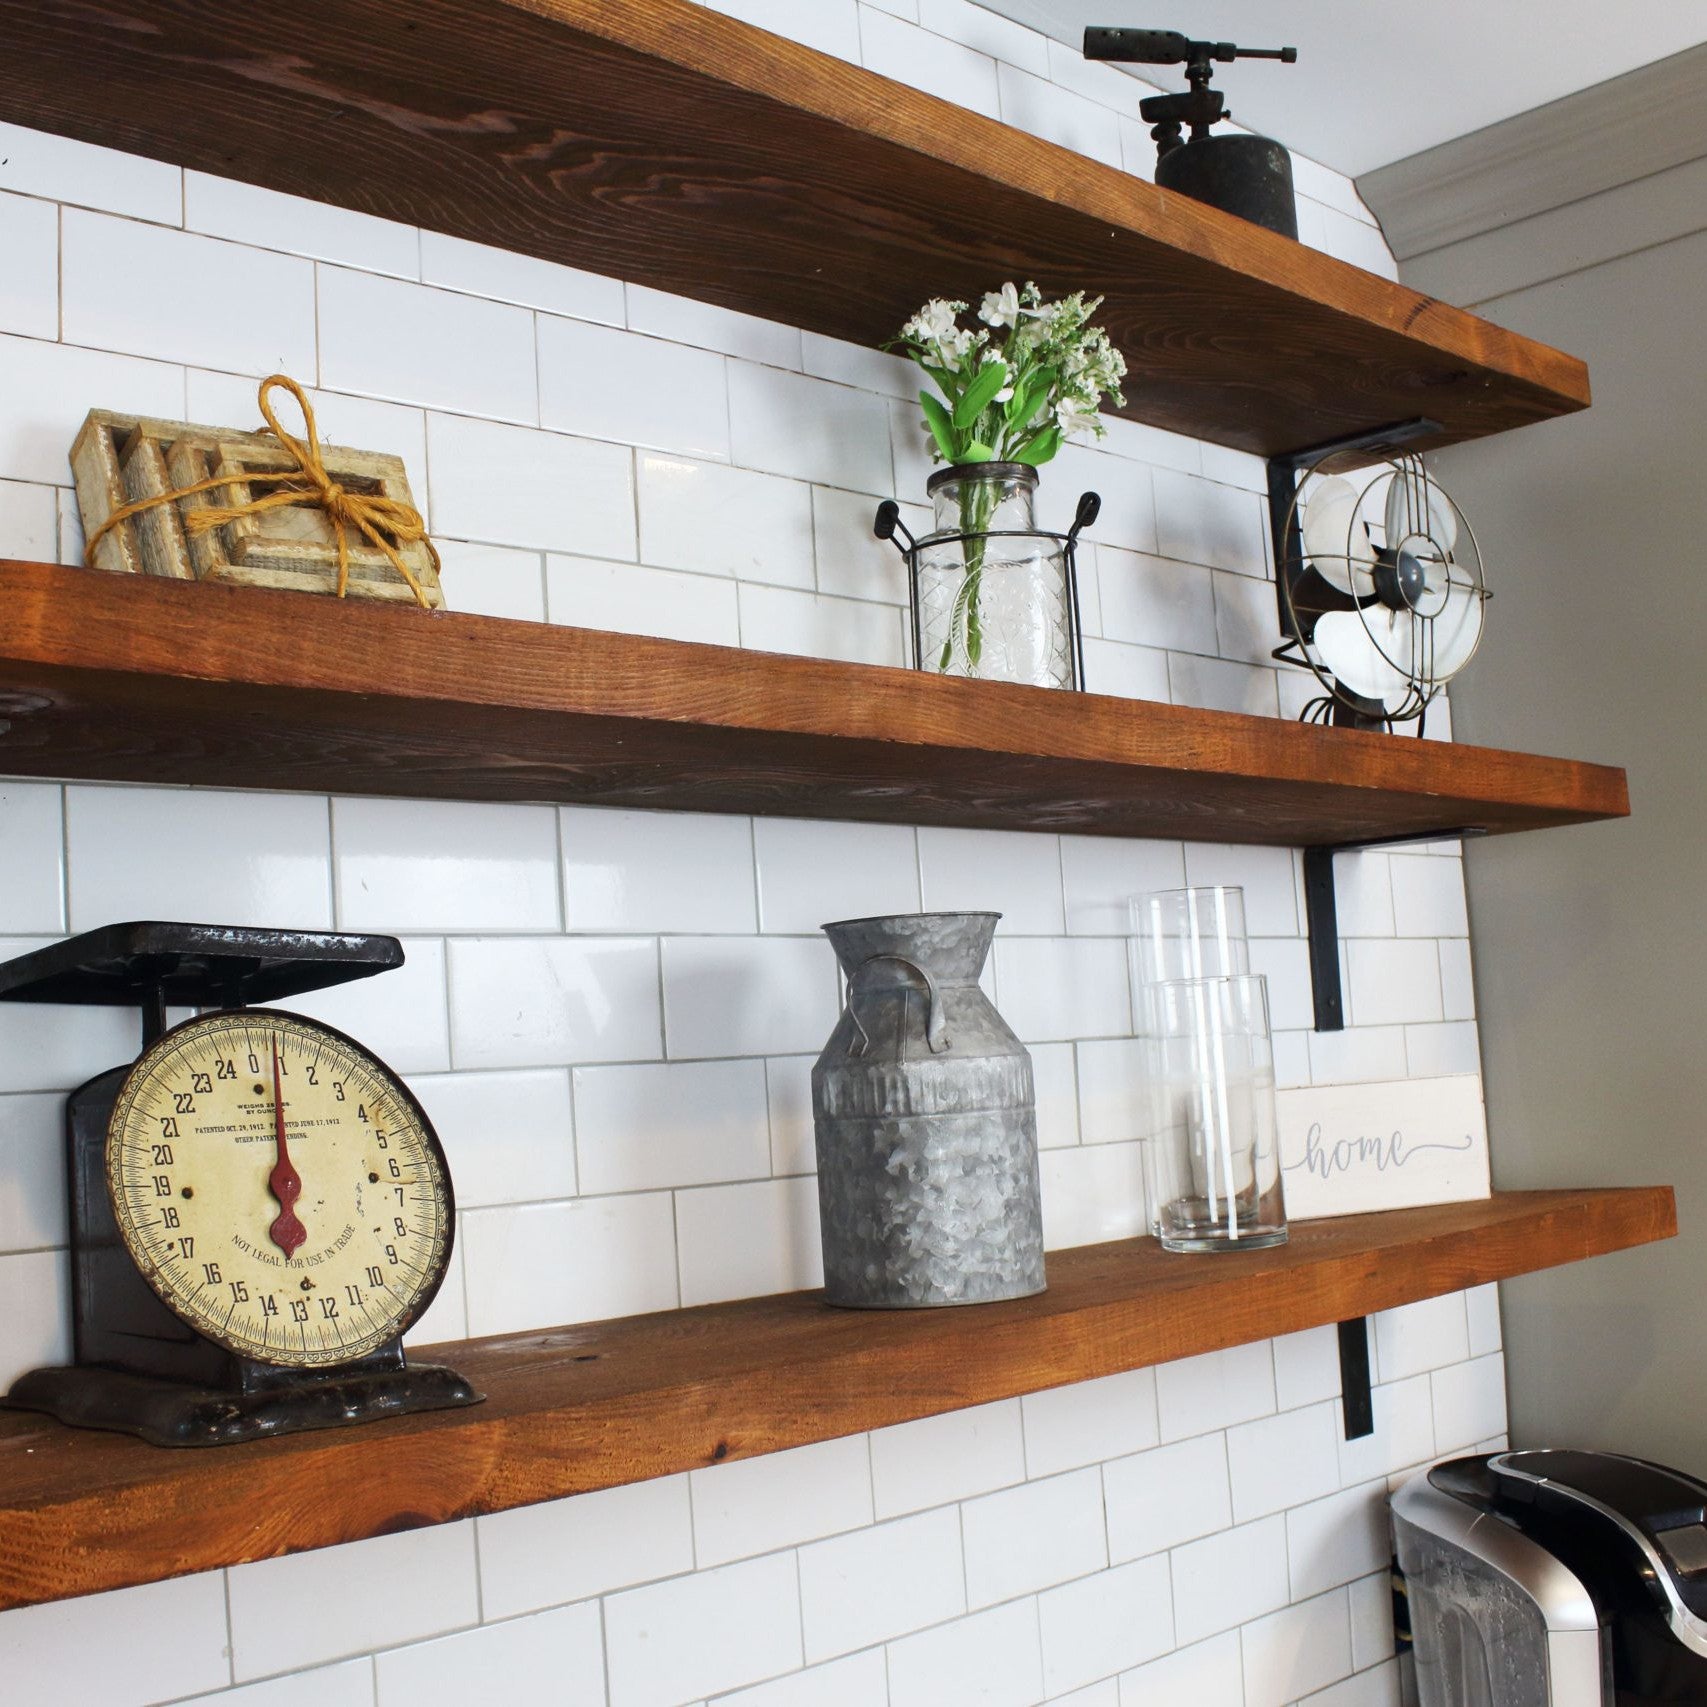 Replacing Barnwood Shelf with Two Open Shelves Above my Kitchen Sink